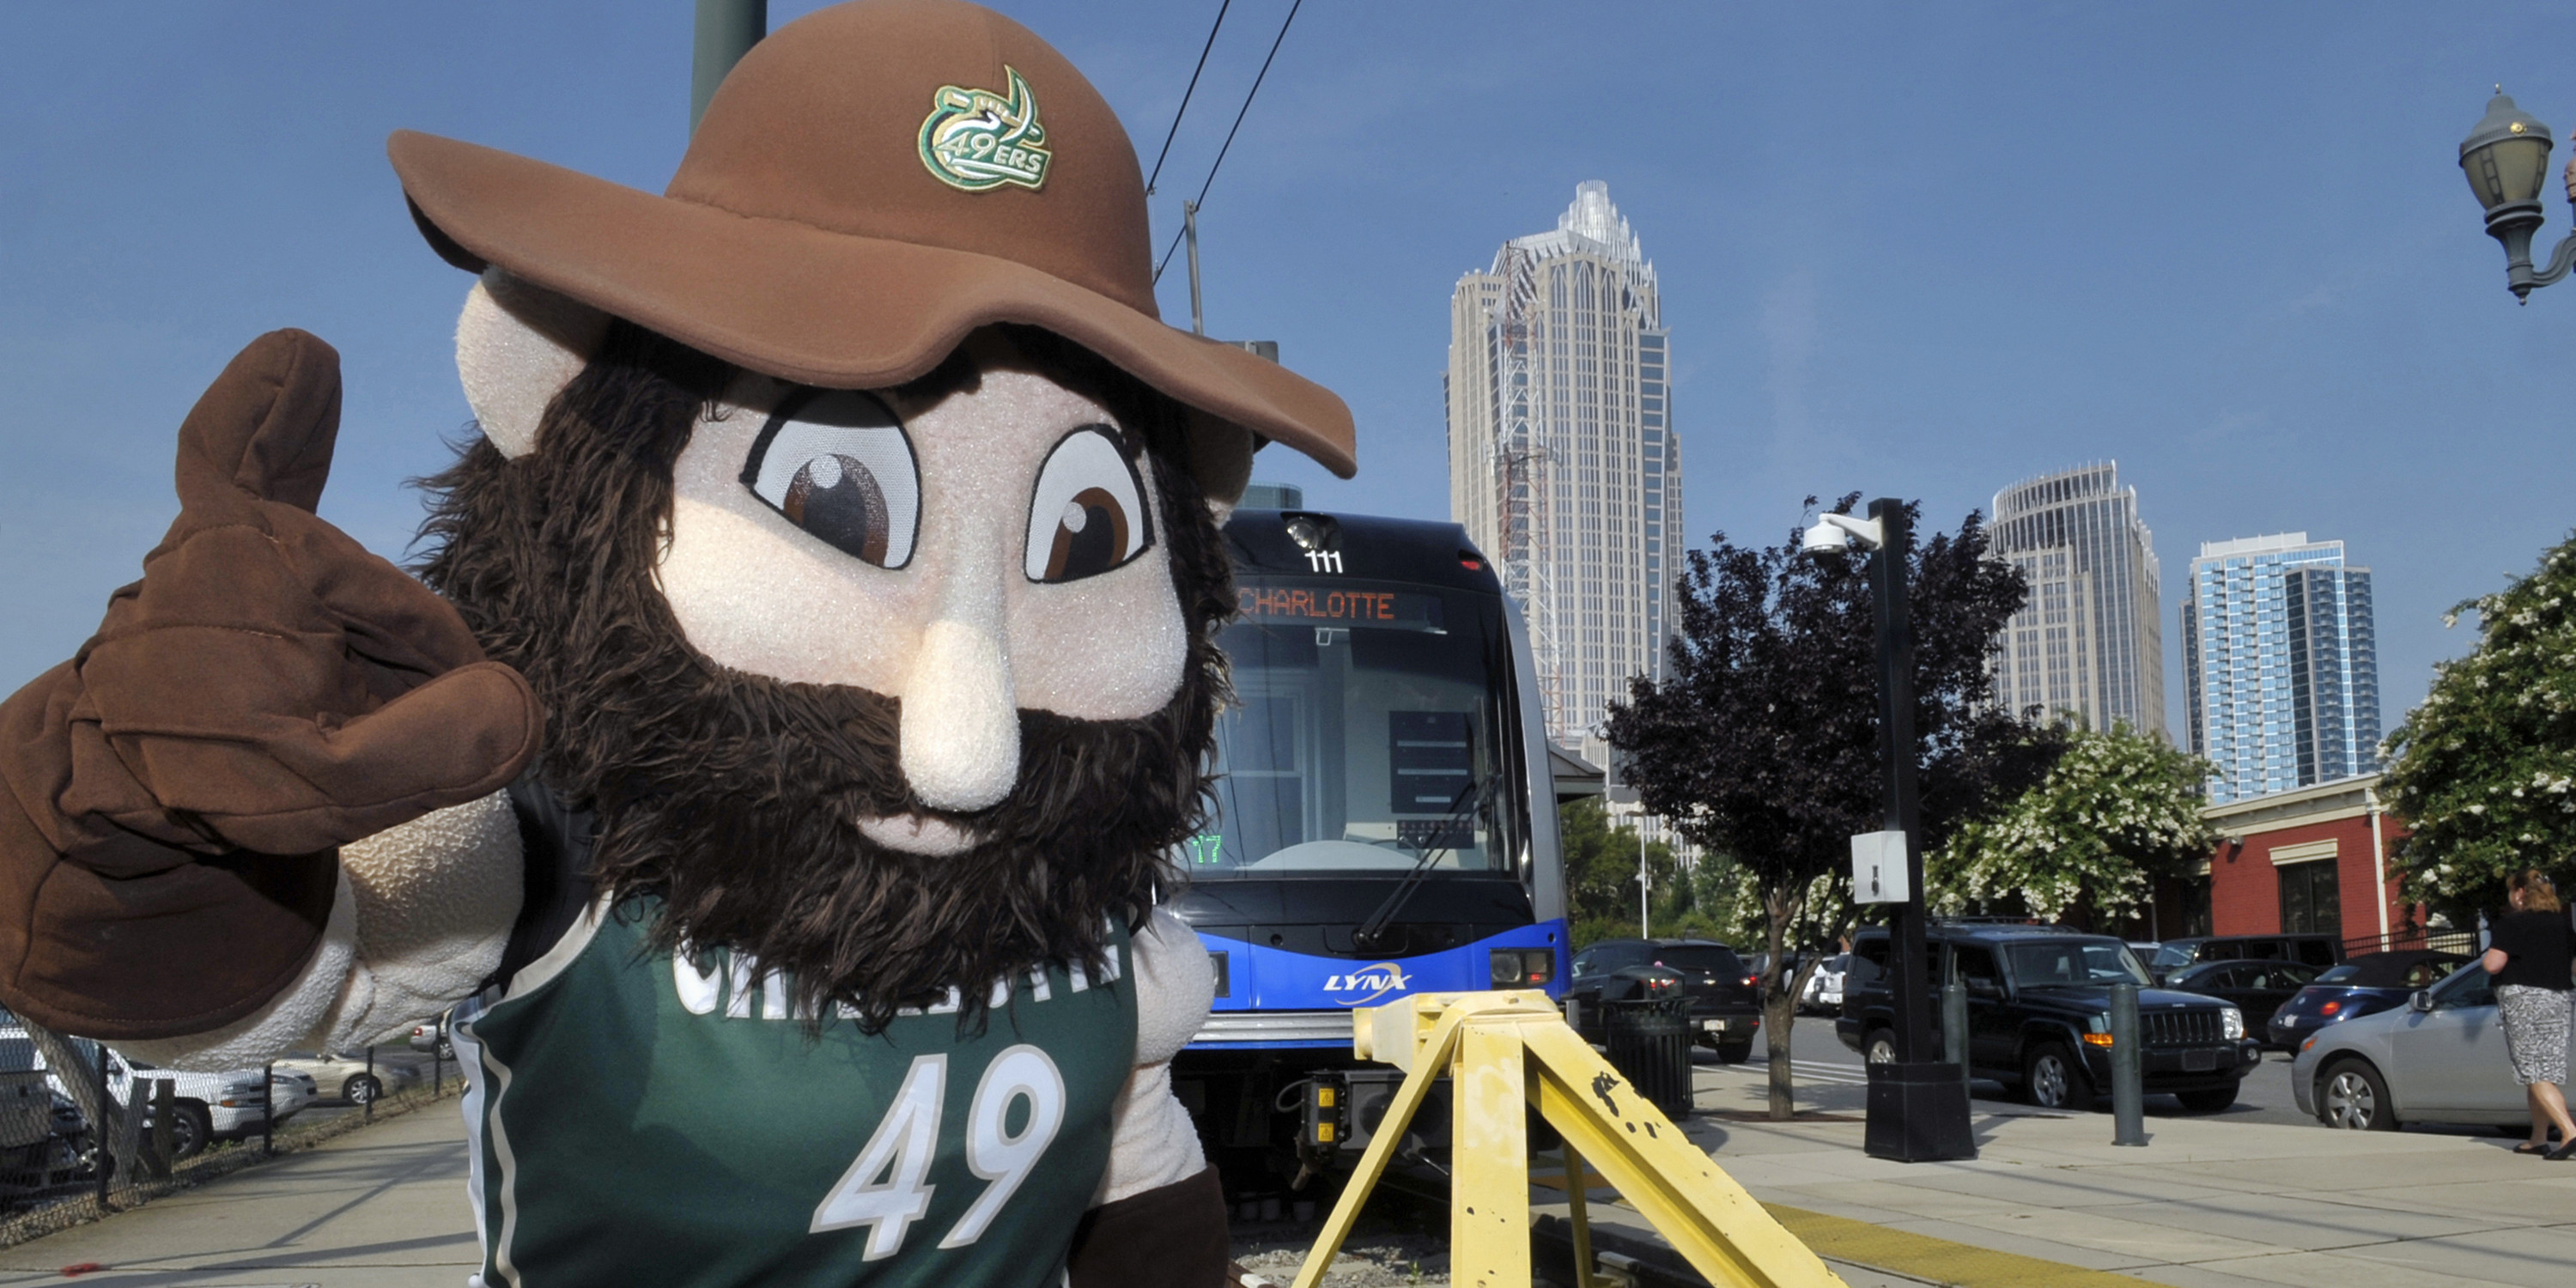 UNC Charlotte mascot, Norm the Miner, celebrates the groundbreaking for the LYNX Blue Line Extension in uptown Charlotte on July 18, 2013.